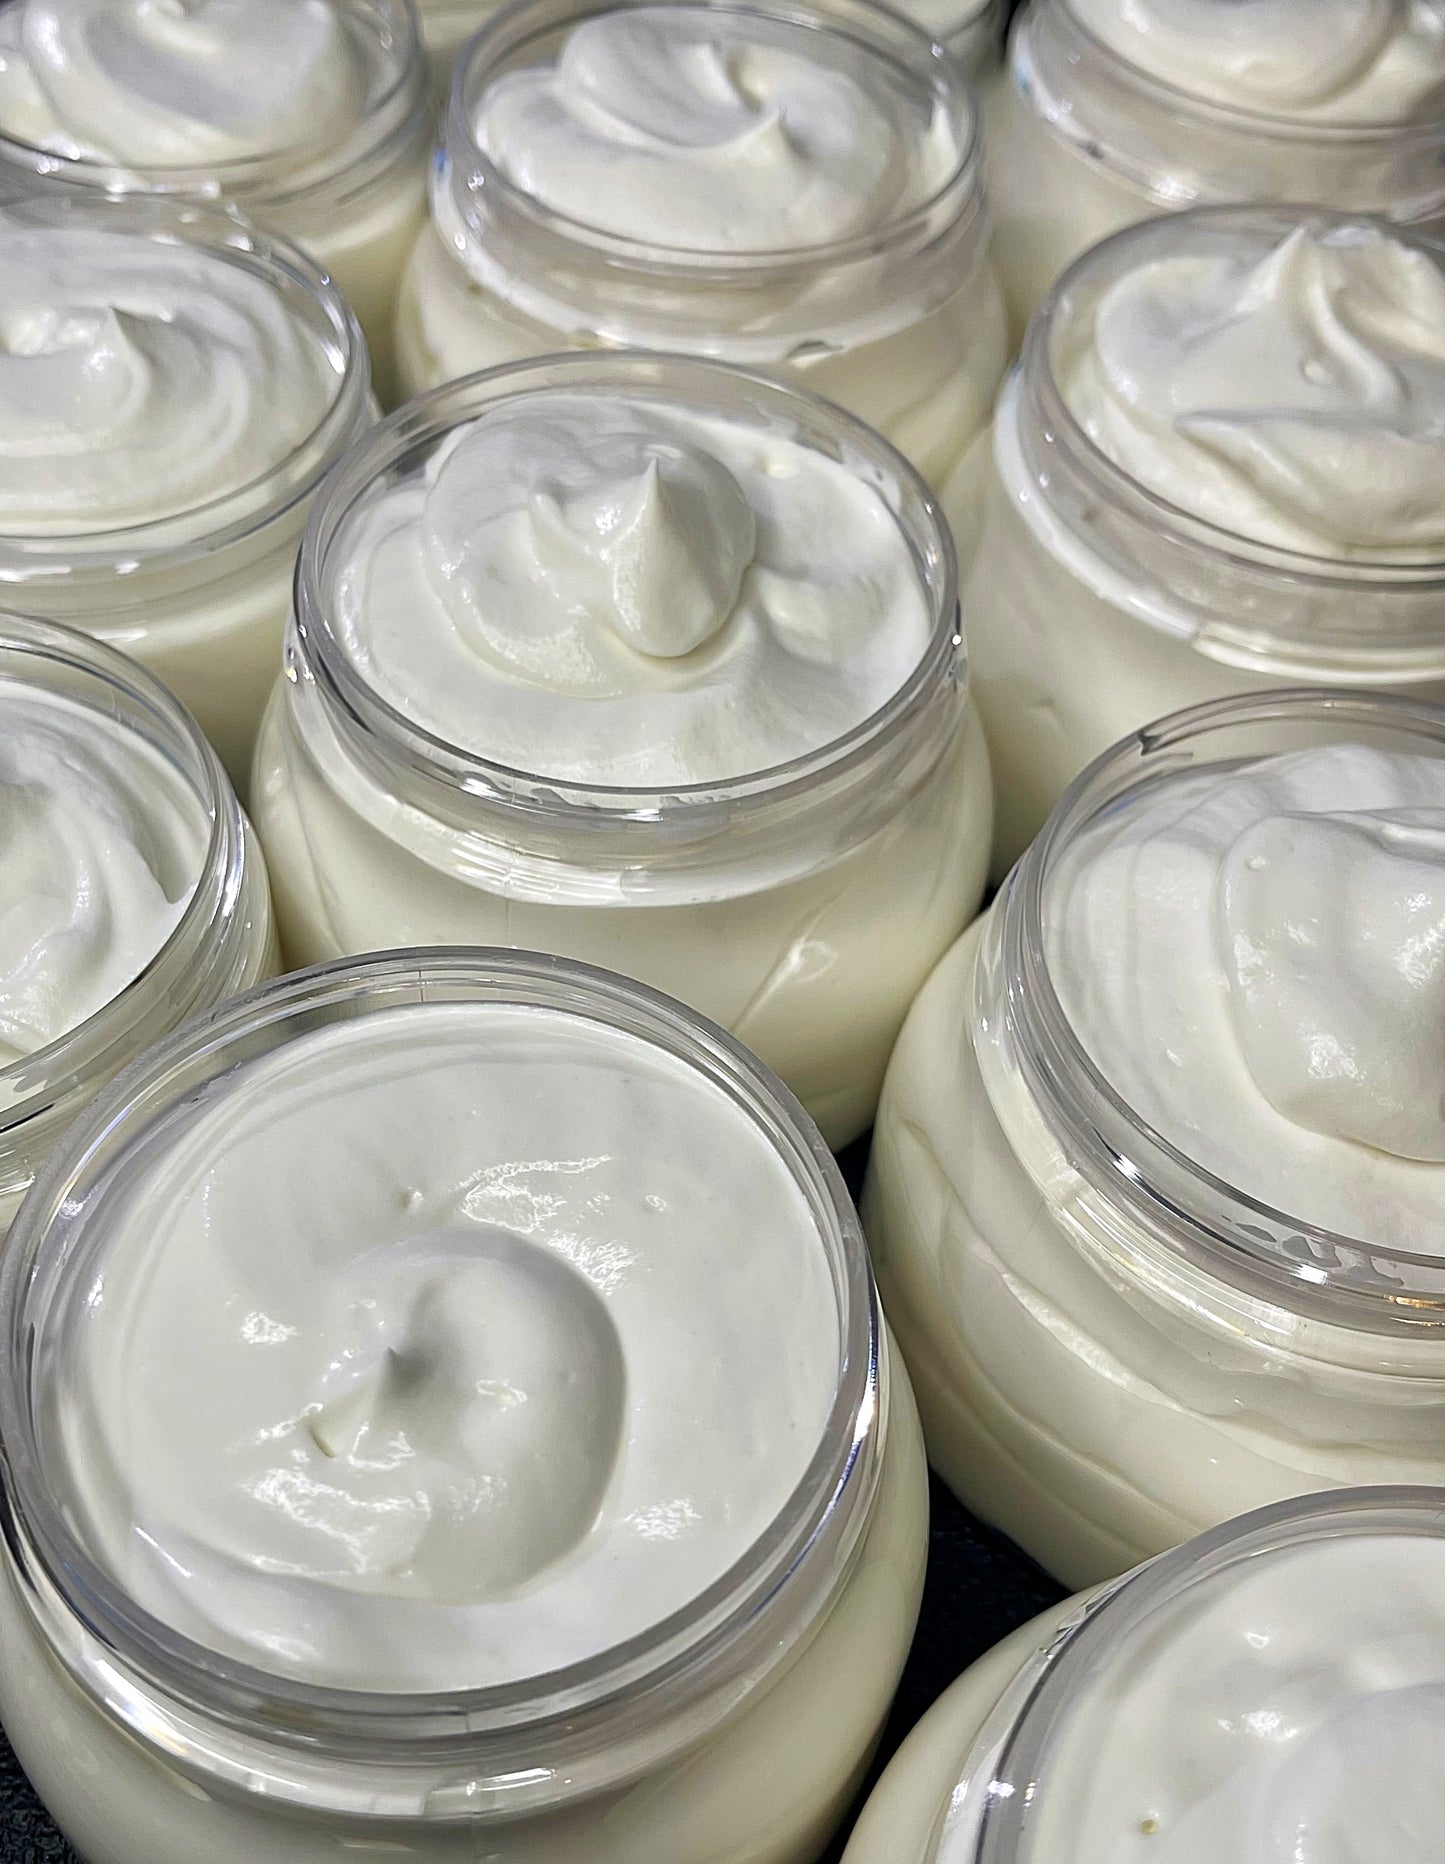 Wild Cherry Almond Whipped Body Butter